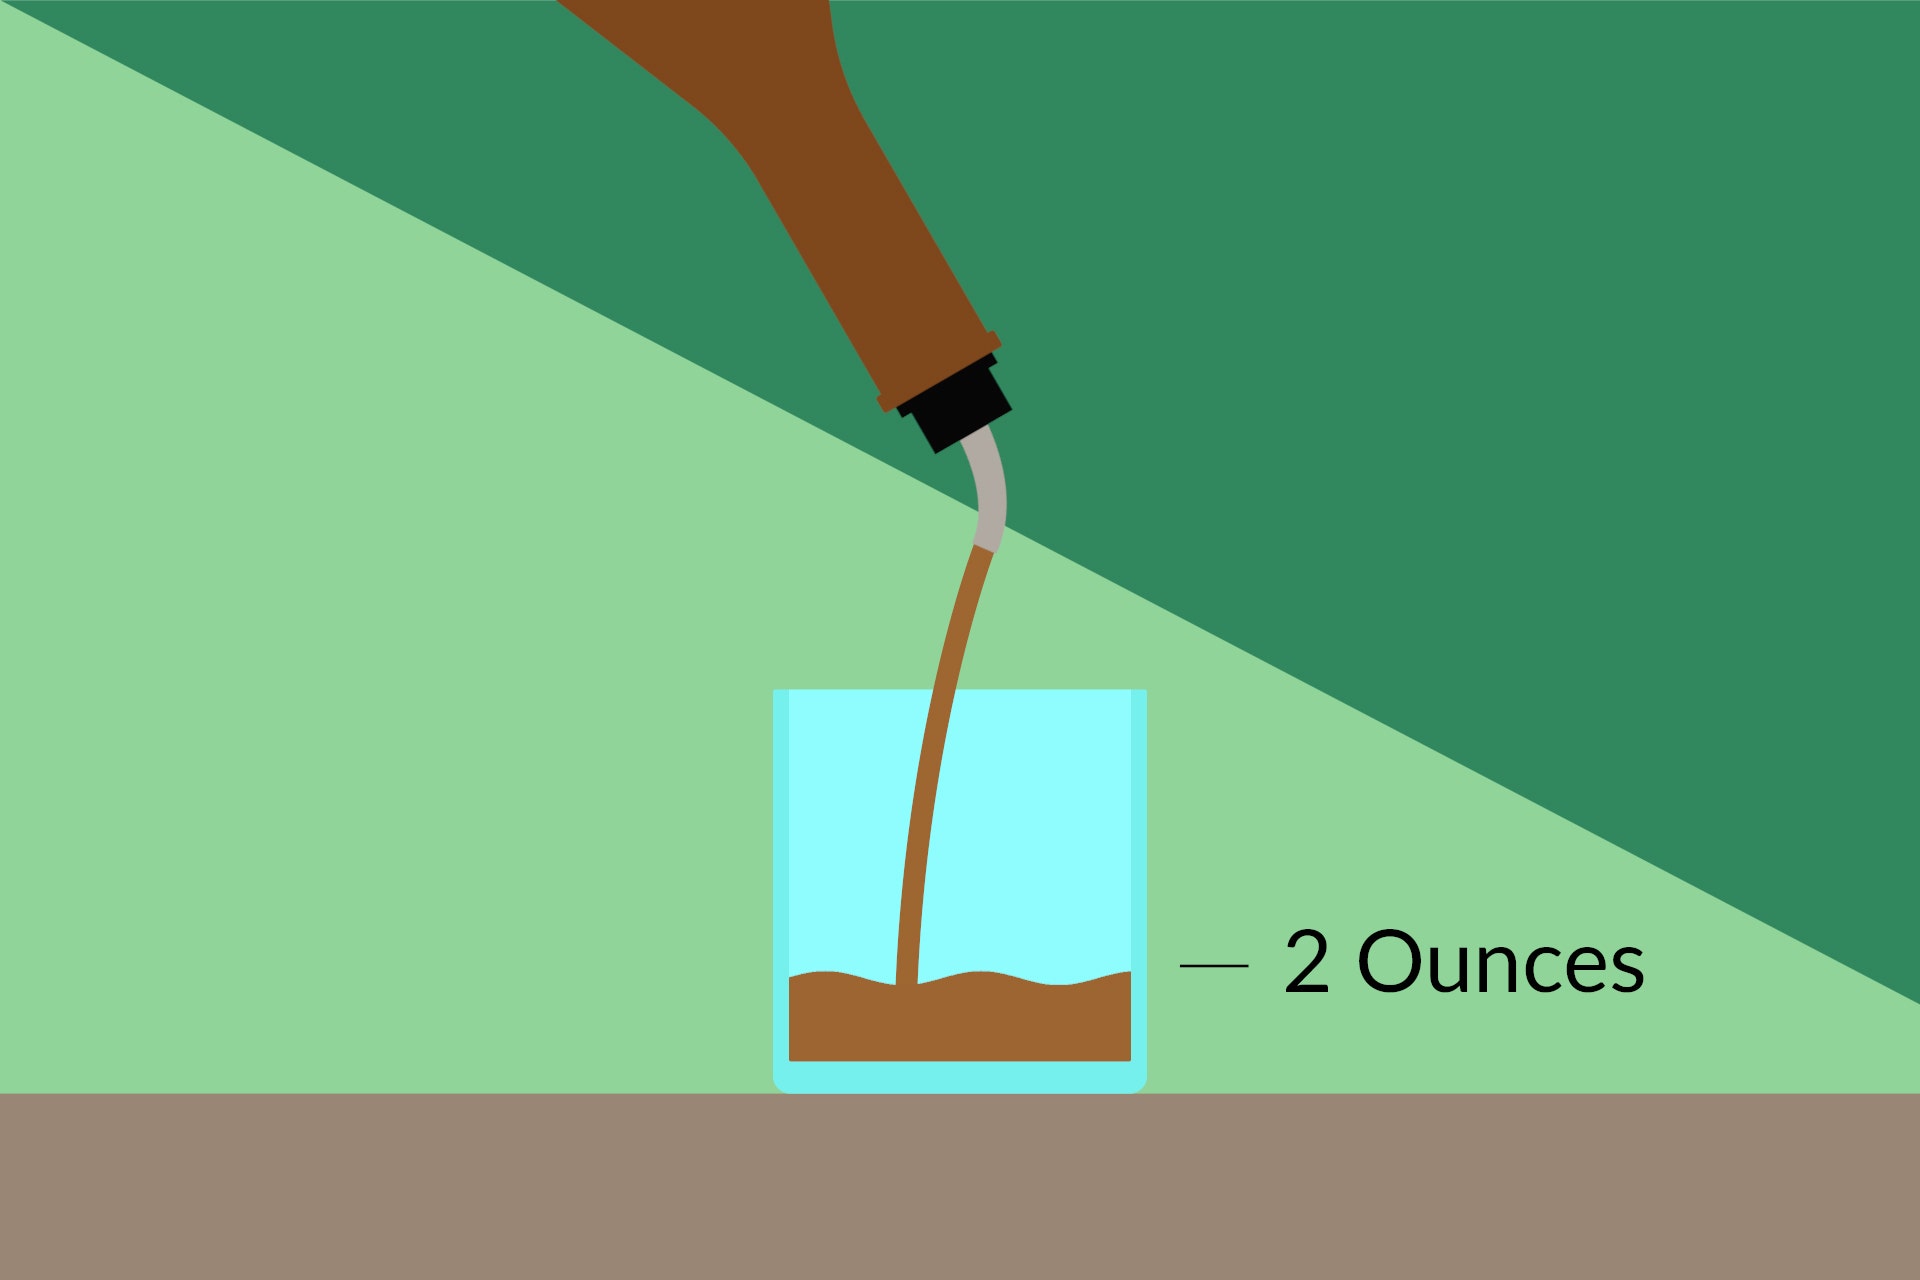 Illustration of two ounces of liquor being poured from a bottle with a speed pourer